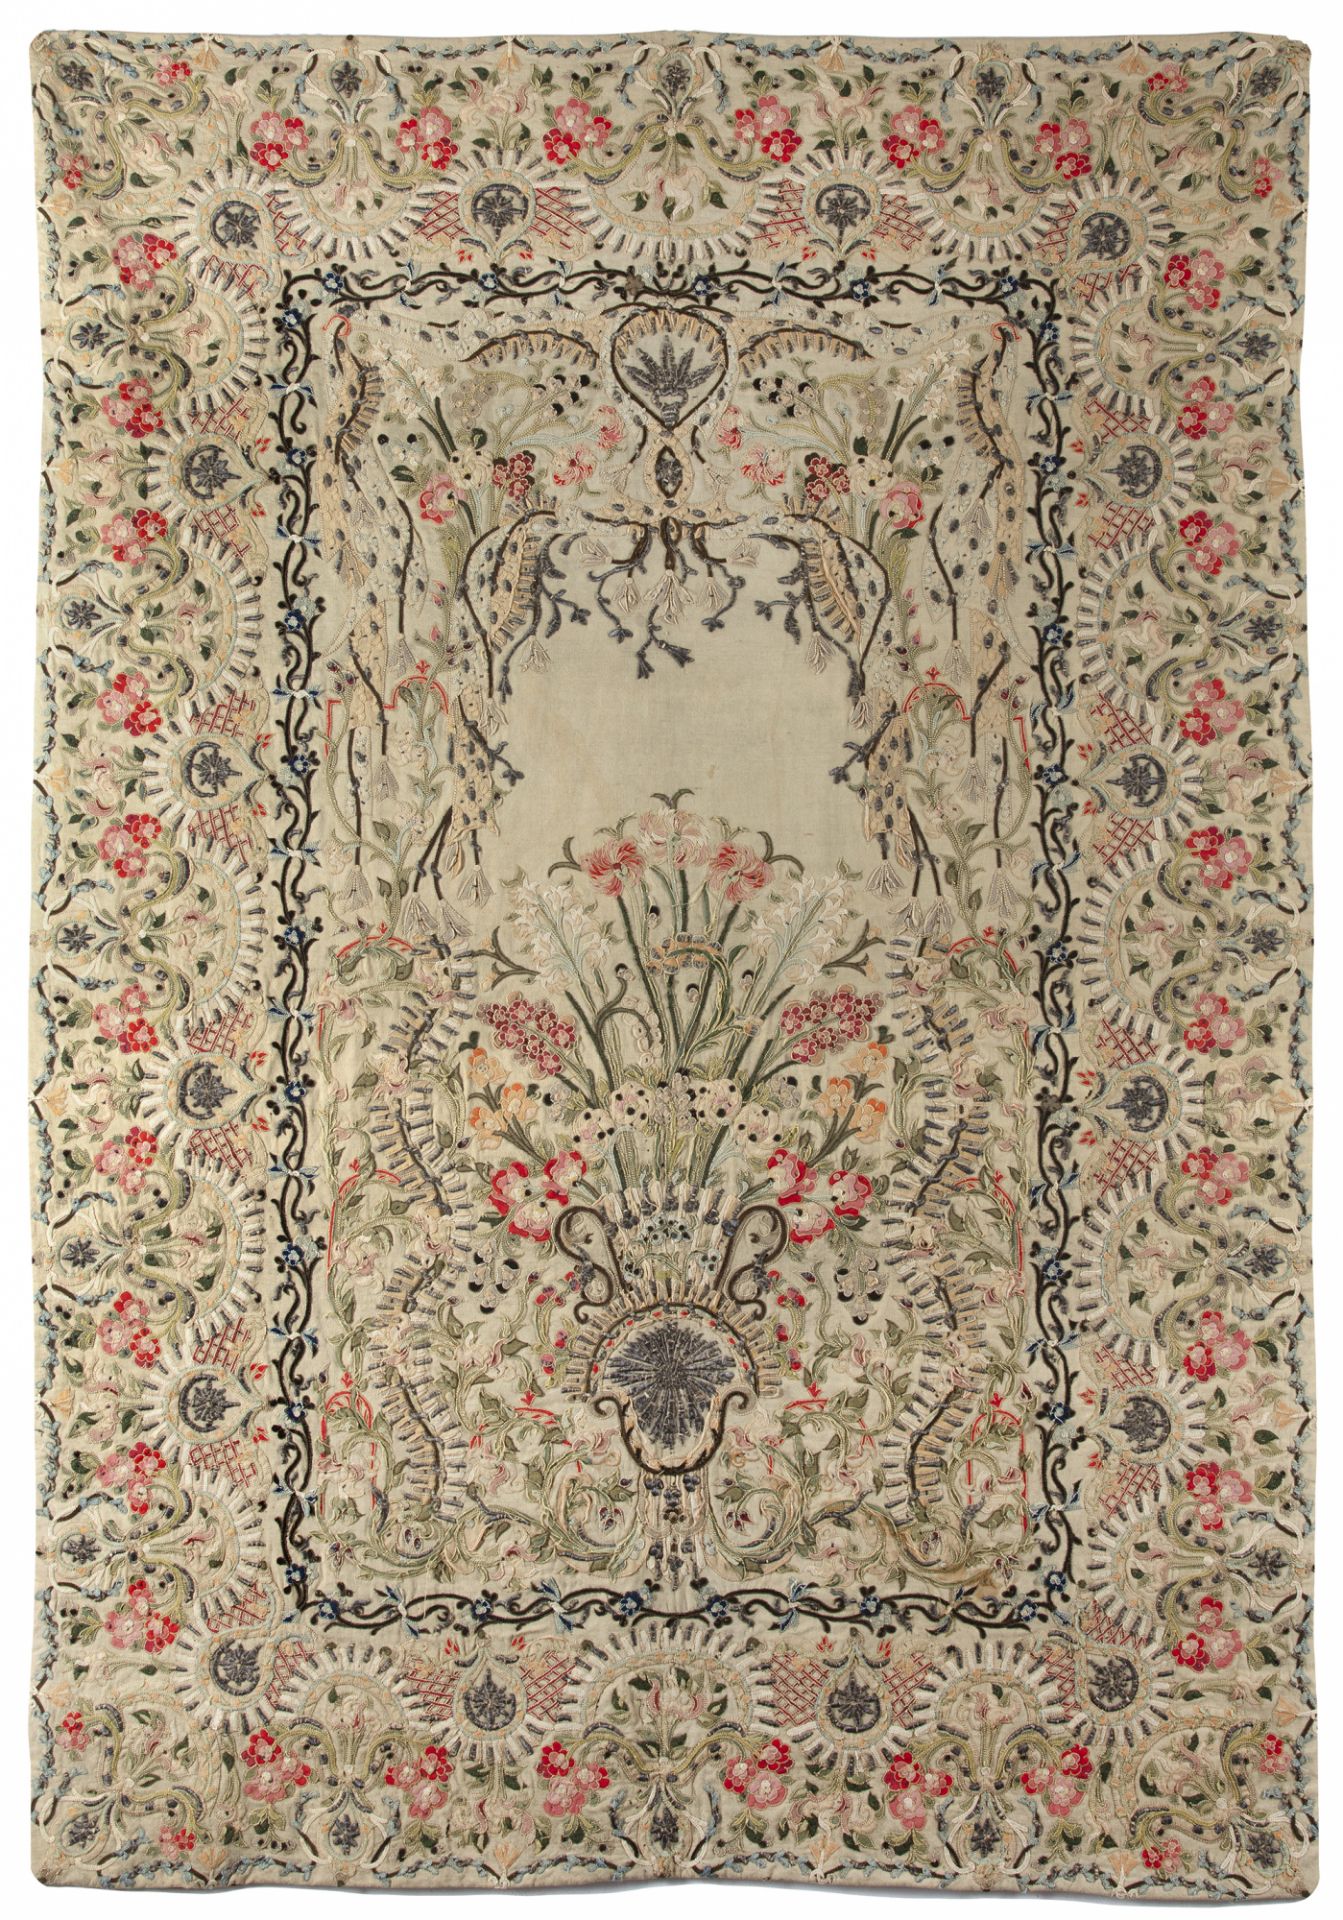 A BANYA LUKA EMBROIDERED AND APPLIQUE PANEL , OTTOMAN, EARLY 19TH CENTURY - Image 2 of 2